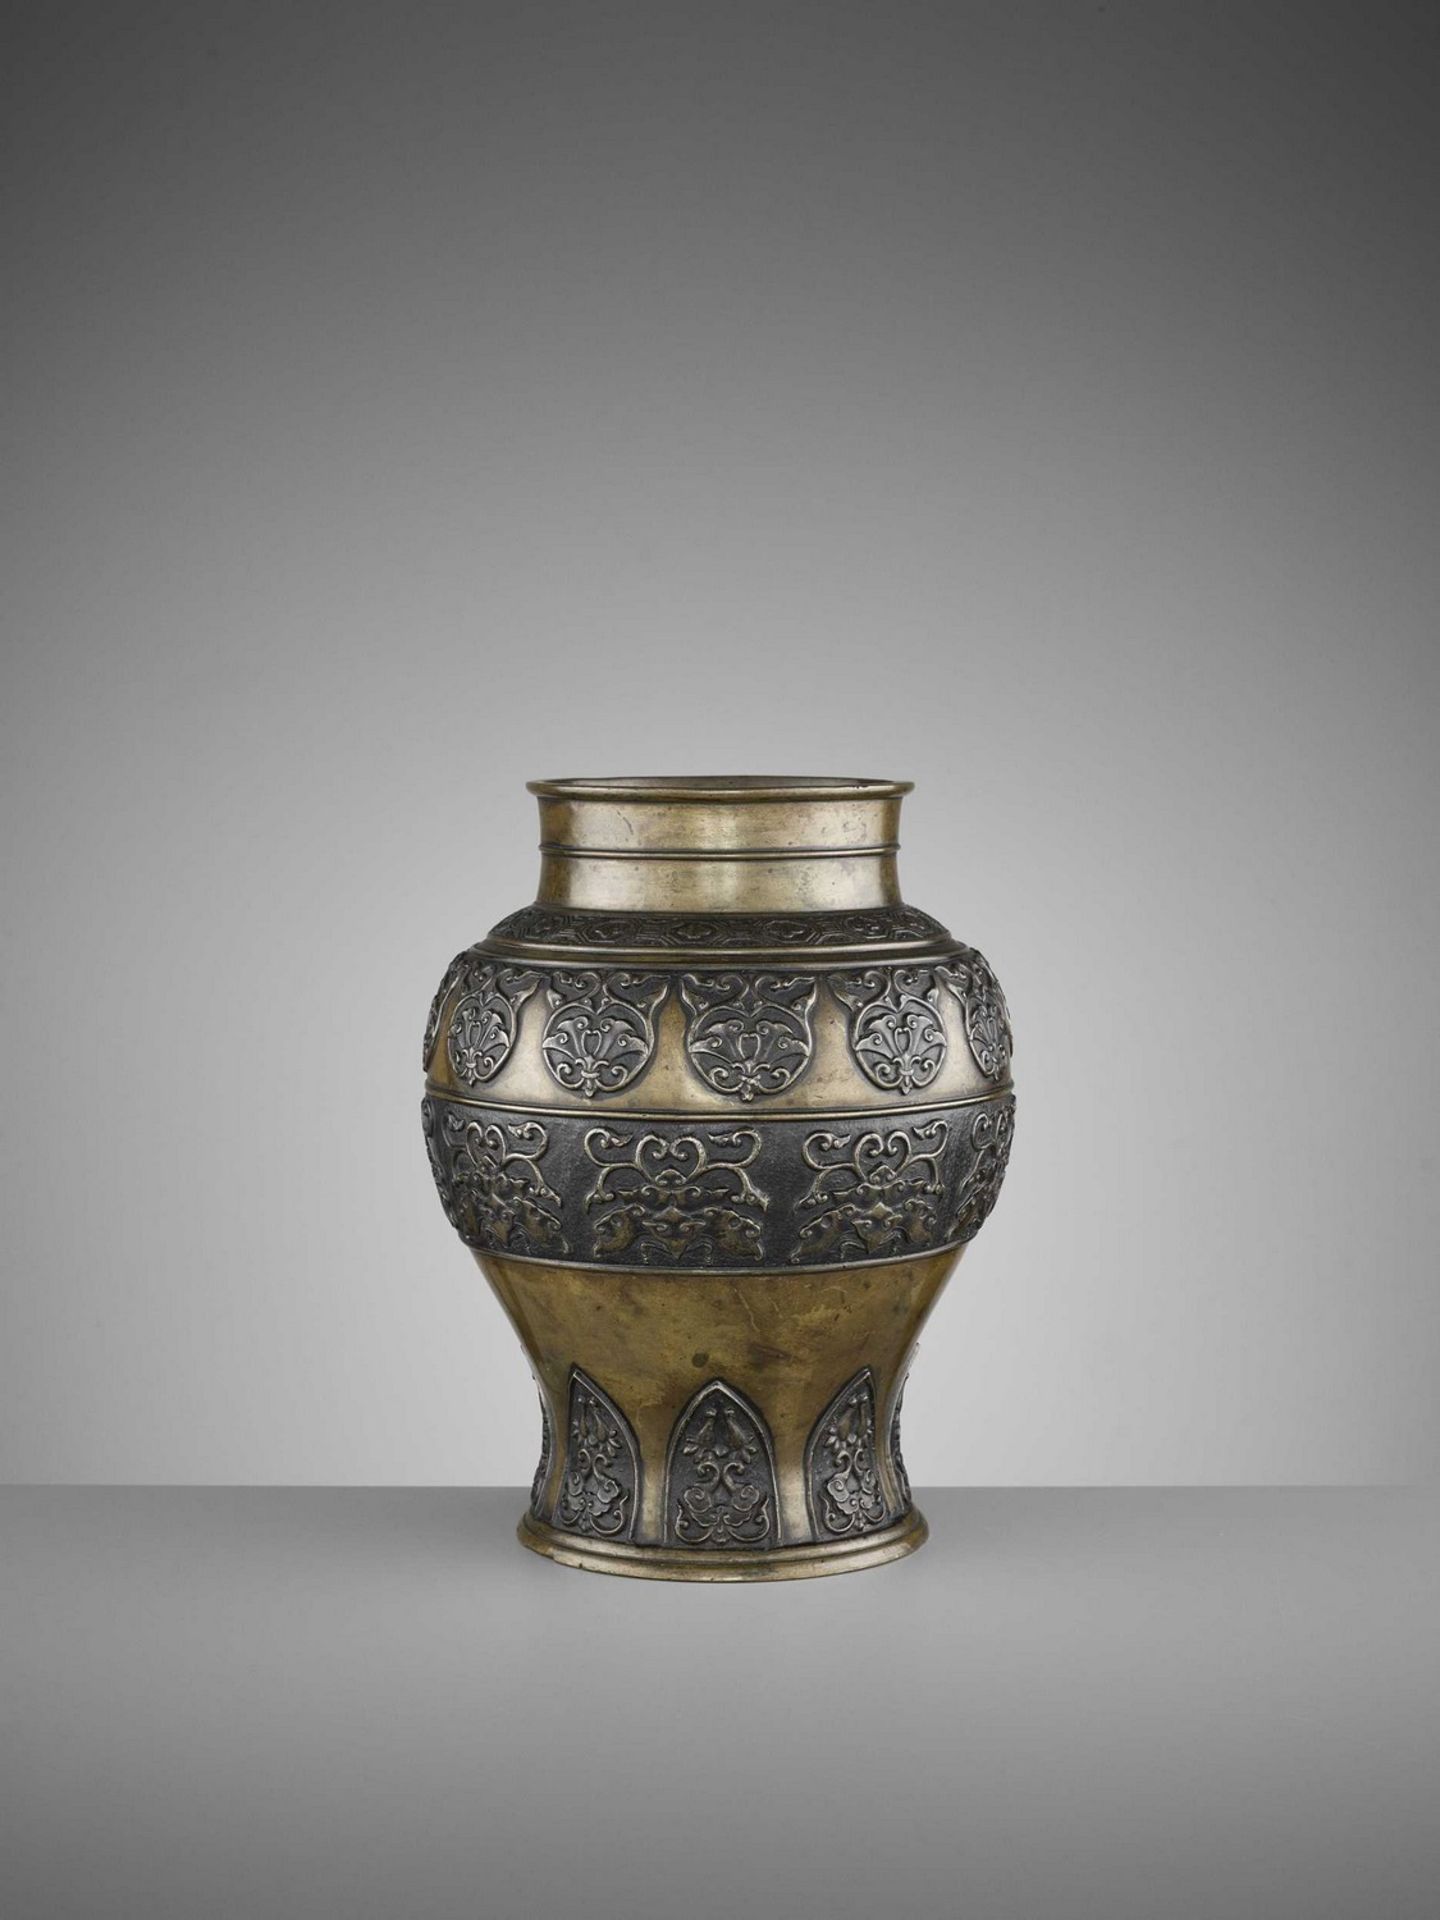 AN ARCHAISTIC BRONZE BALUSTER VASE, 17TH CENTURY - Image 2 of 8